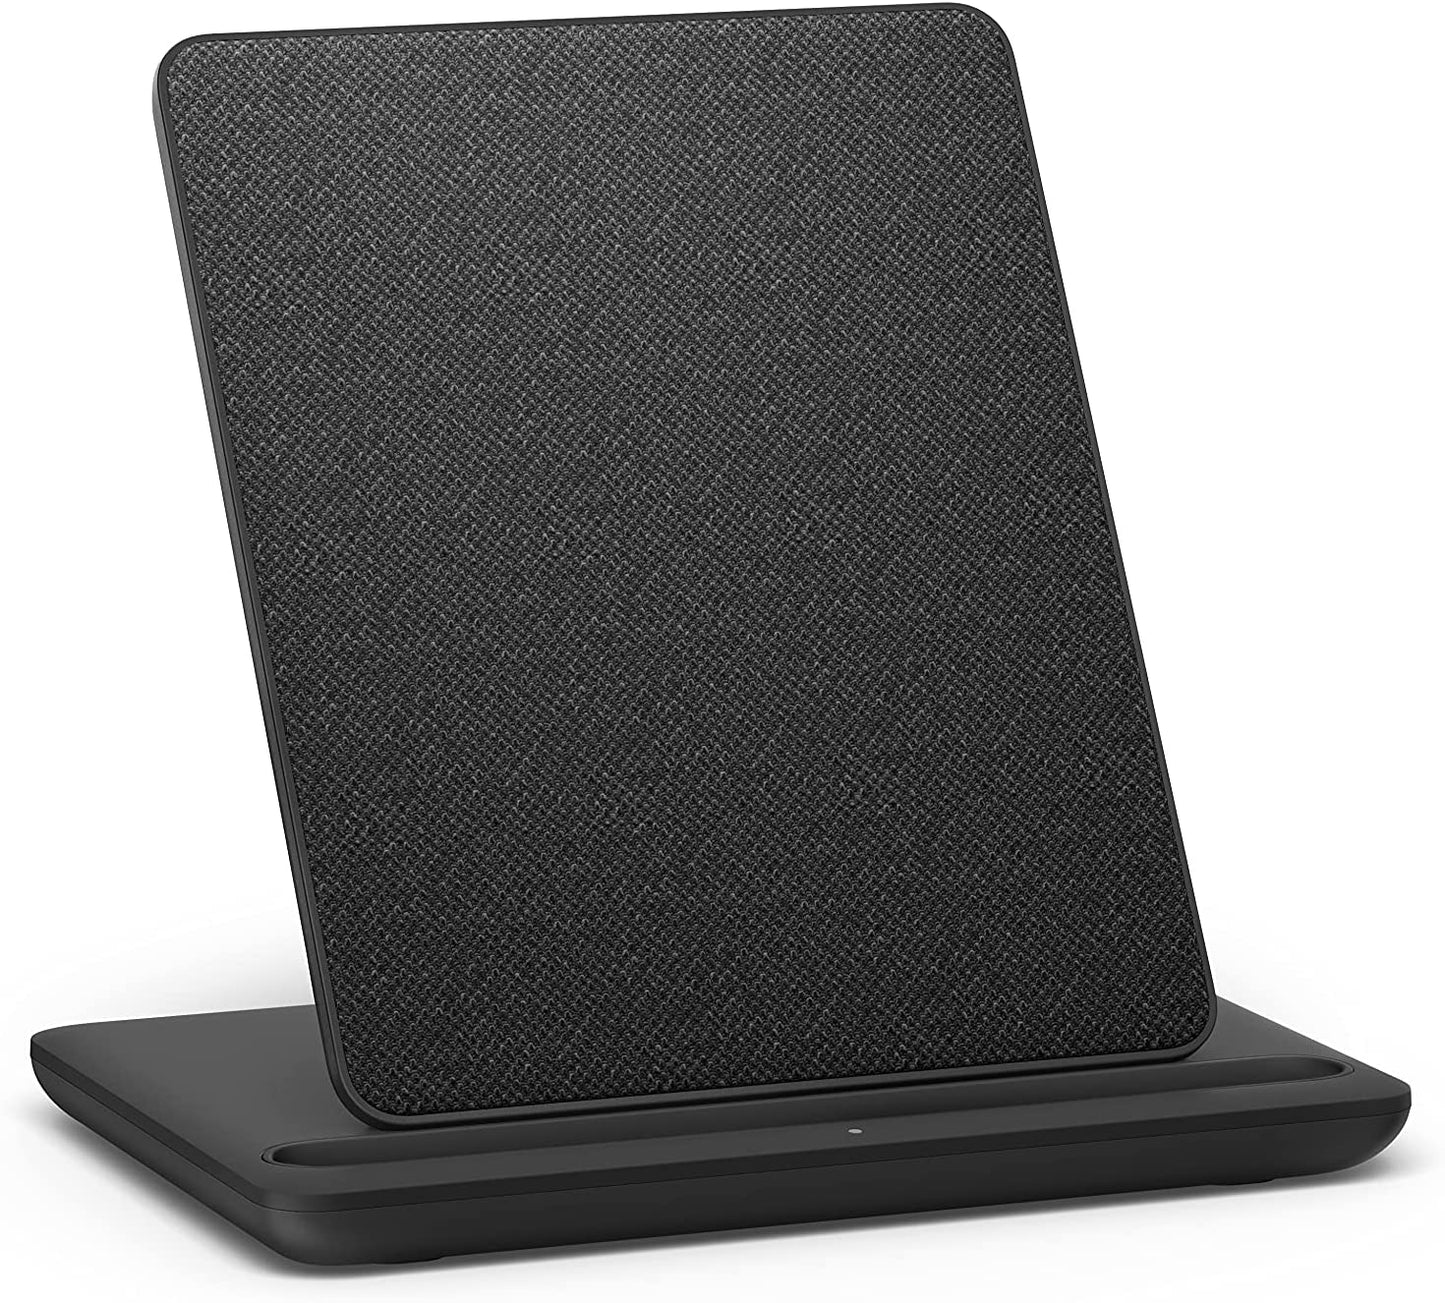 Wireless Charging Dock for Kindle Paperwhite Signature Edition